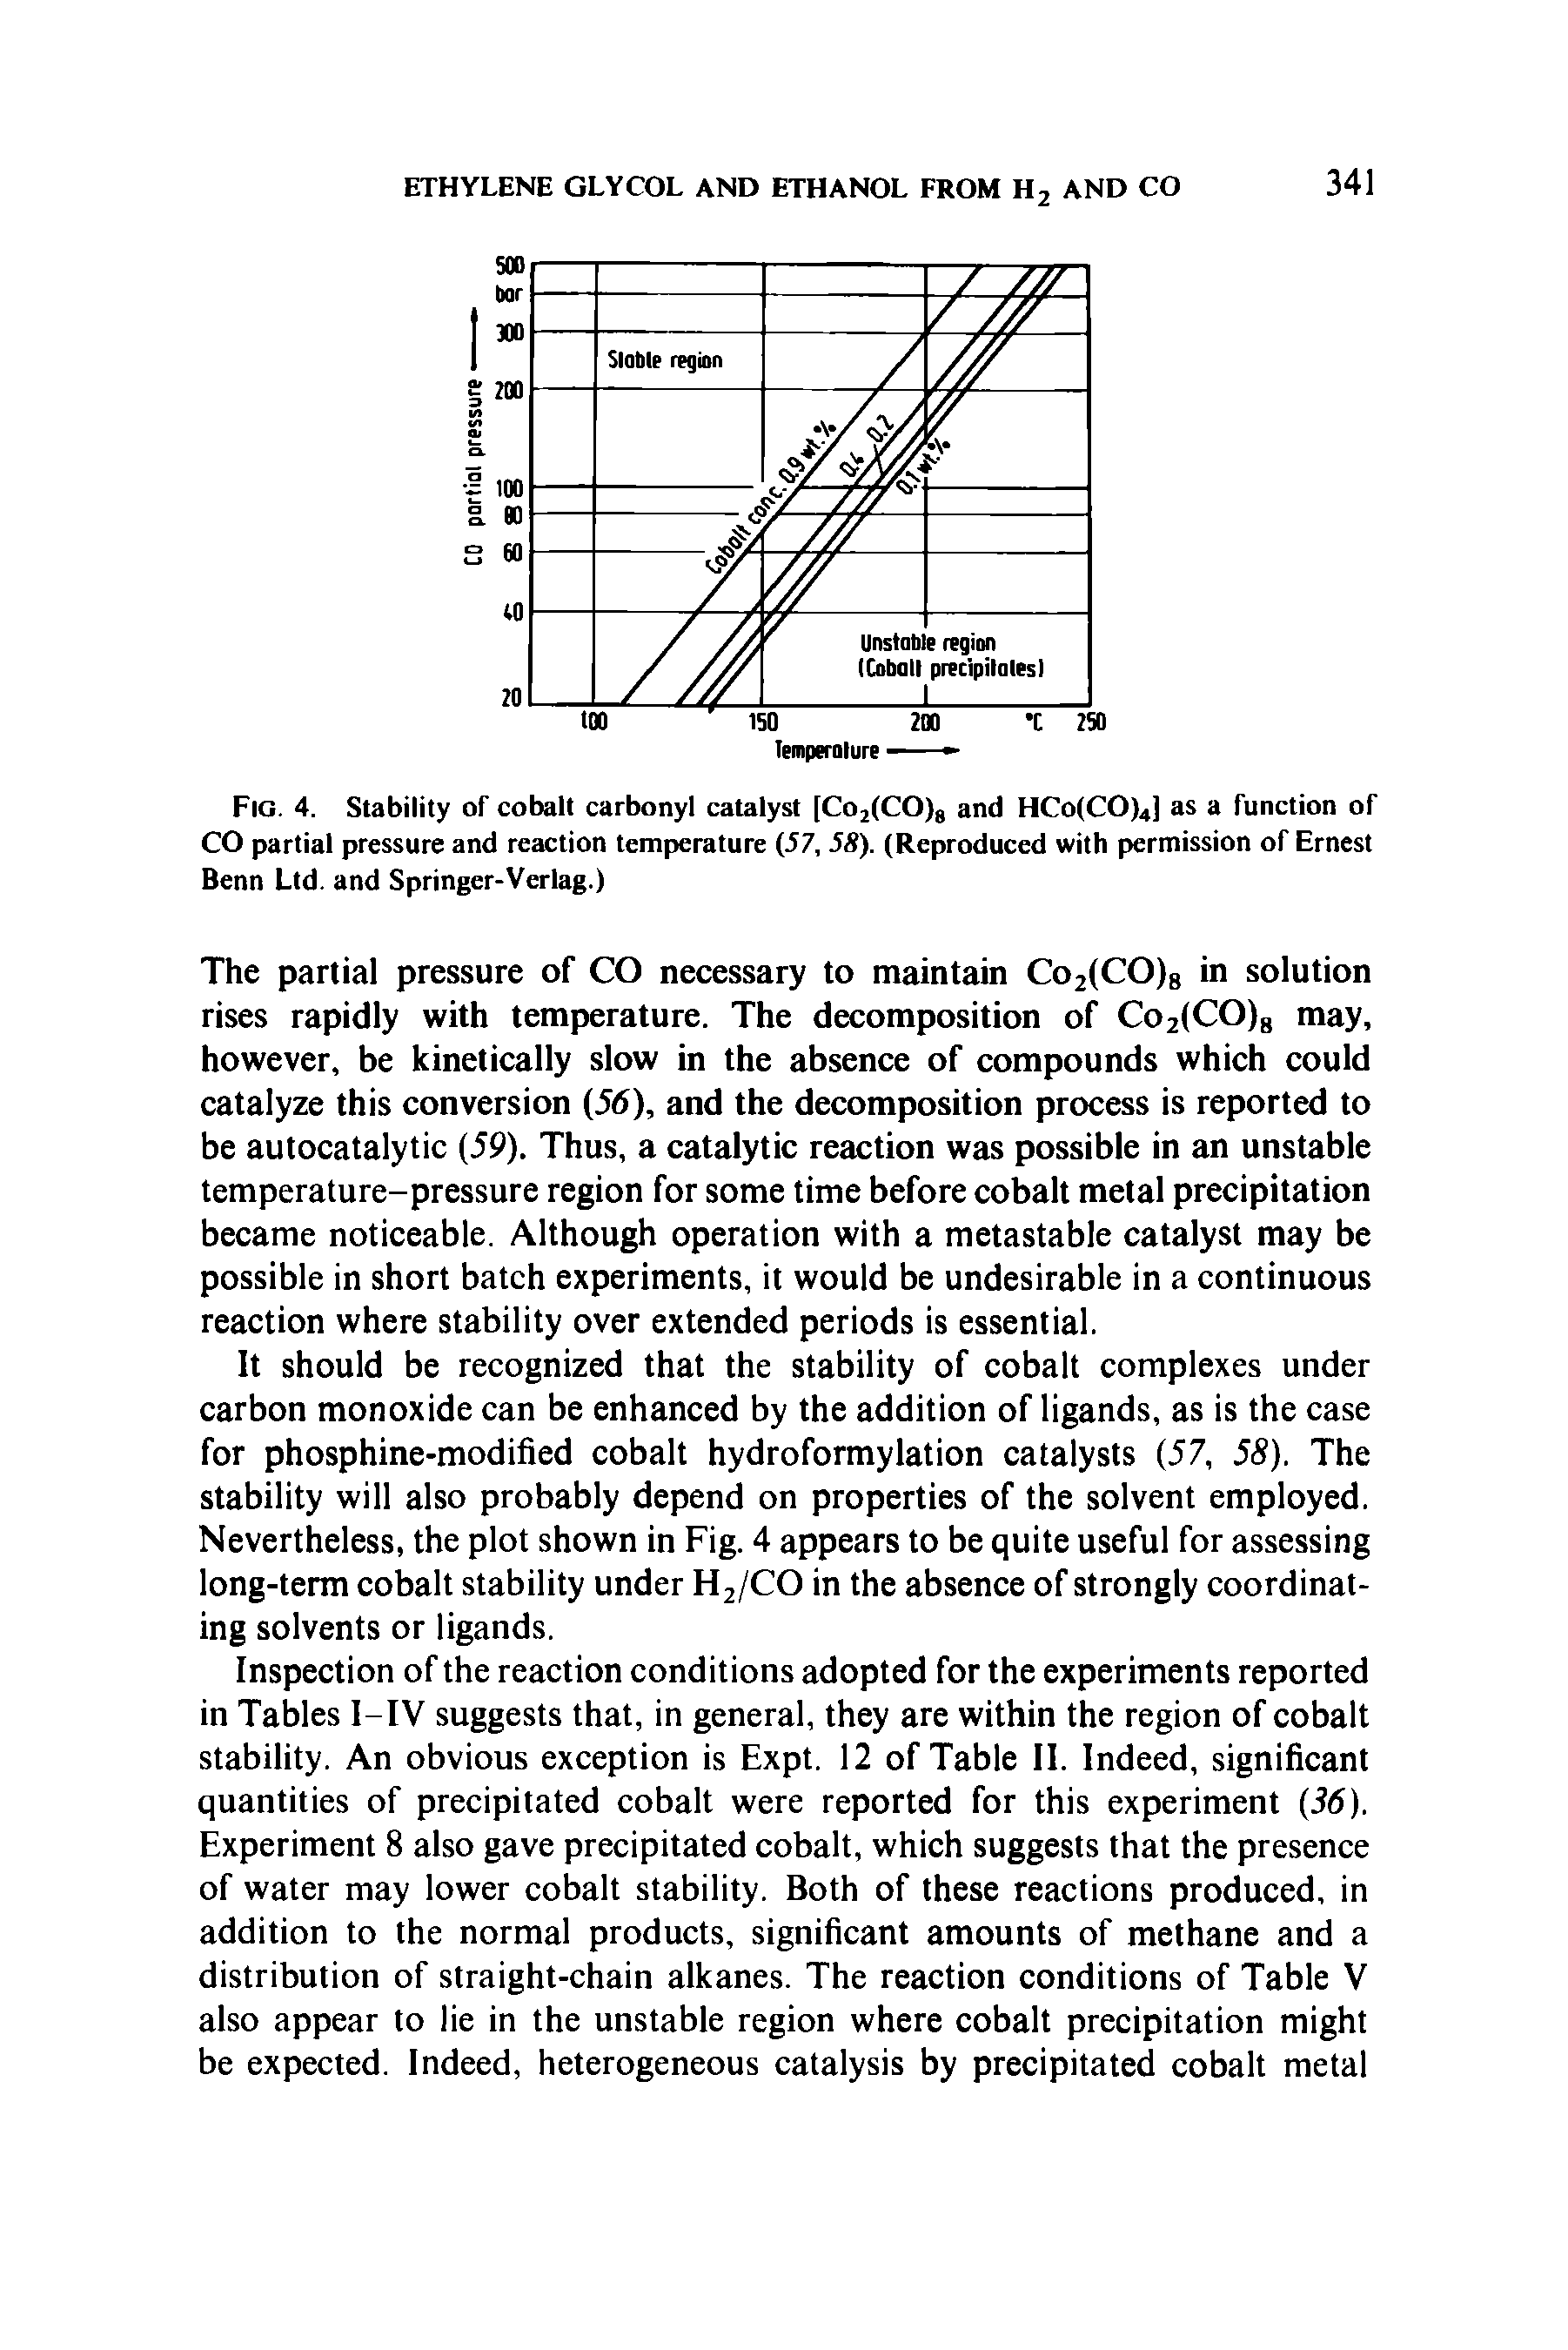 Fig. 4. Stability of cobalt carbonyl catalyst [Co2(CO)8 and HCo(CO)4] as a function of CO partial pressure and reaction temperature (57, 58). (Reproduced with permission of Ernest Benn Ltd. and Springer-Verlag.)...